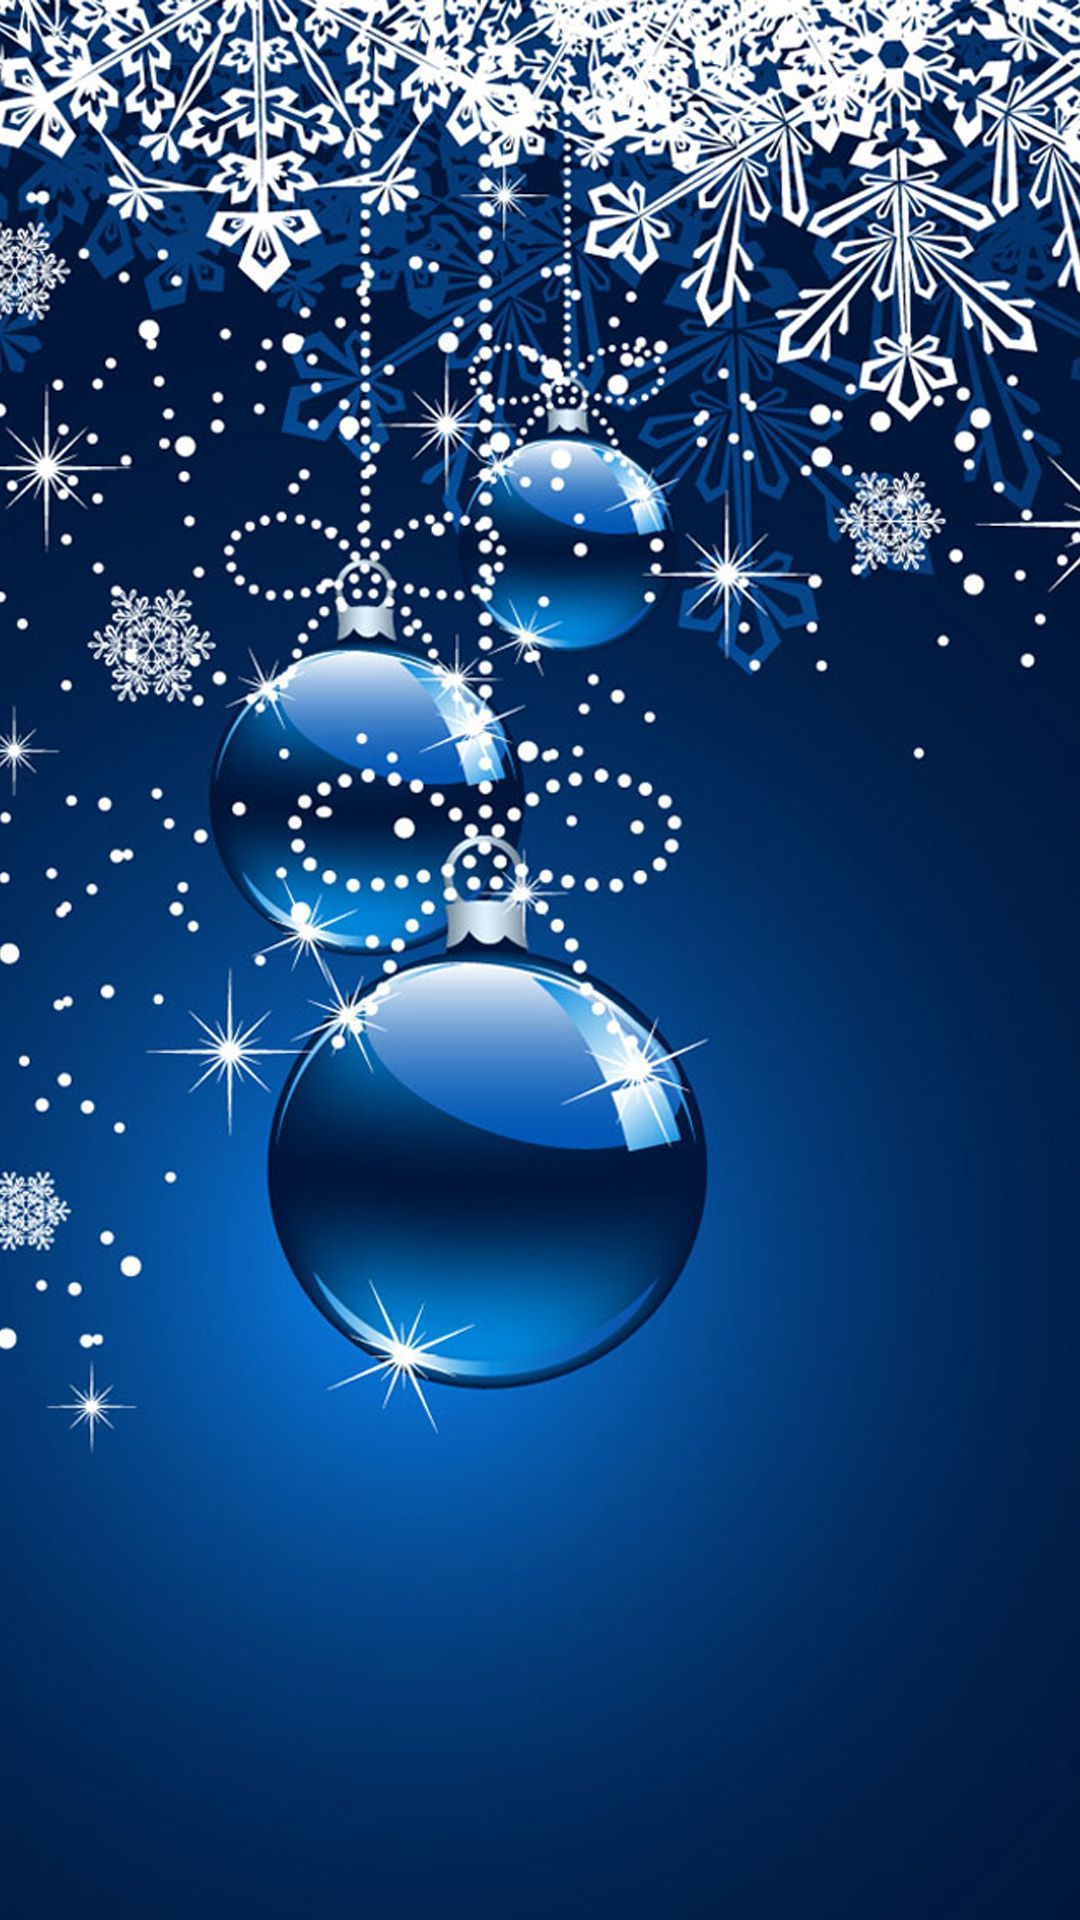 168christmas Ornaments Blue Background Galaxy S5 Wallpaper 080×1. Christmas Phone Wallpaper, Wallpaper Iphone Christmas, Blue Christmas Ornaments